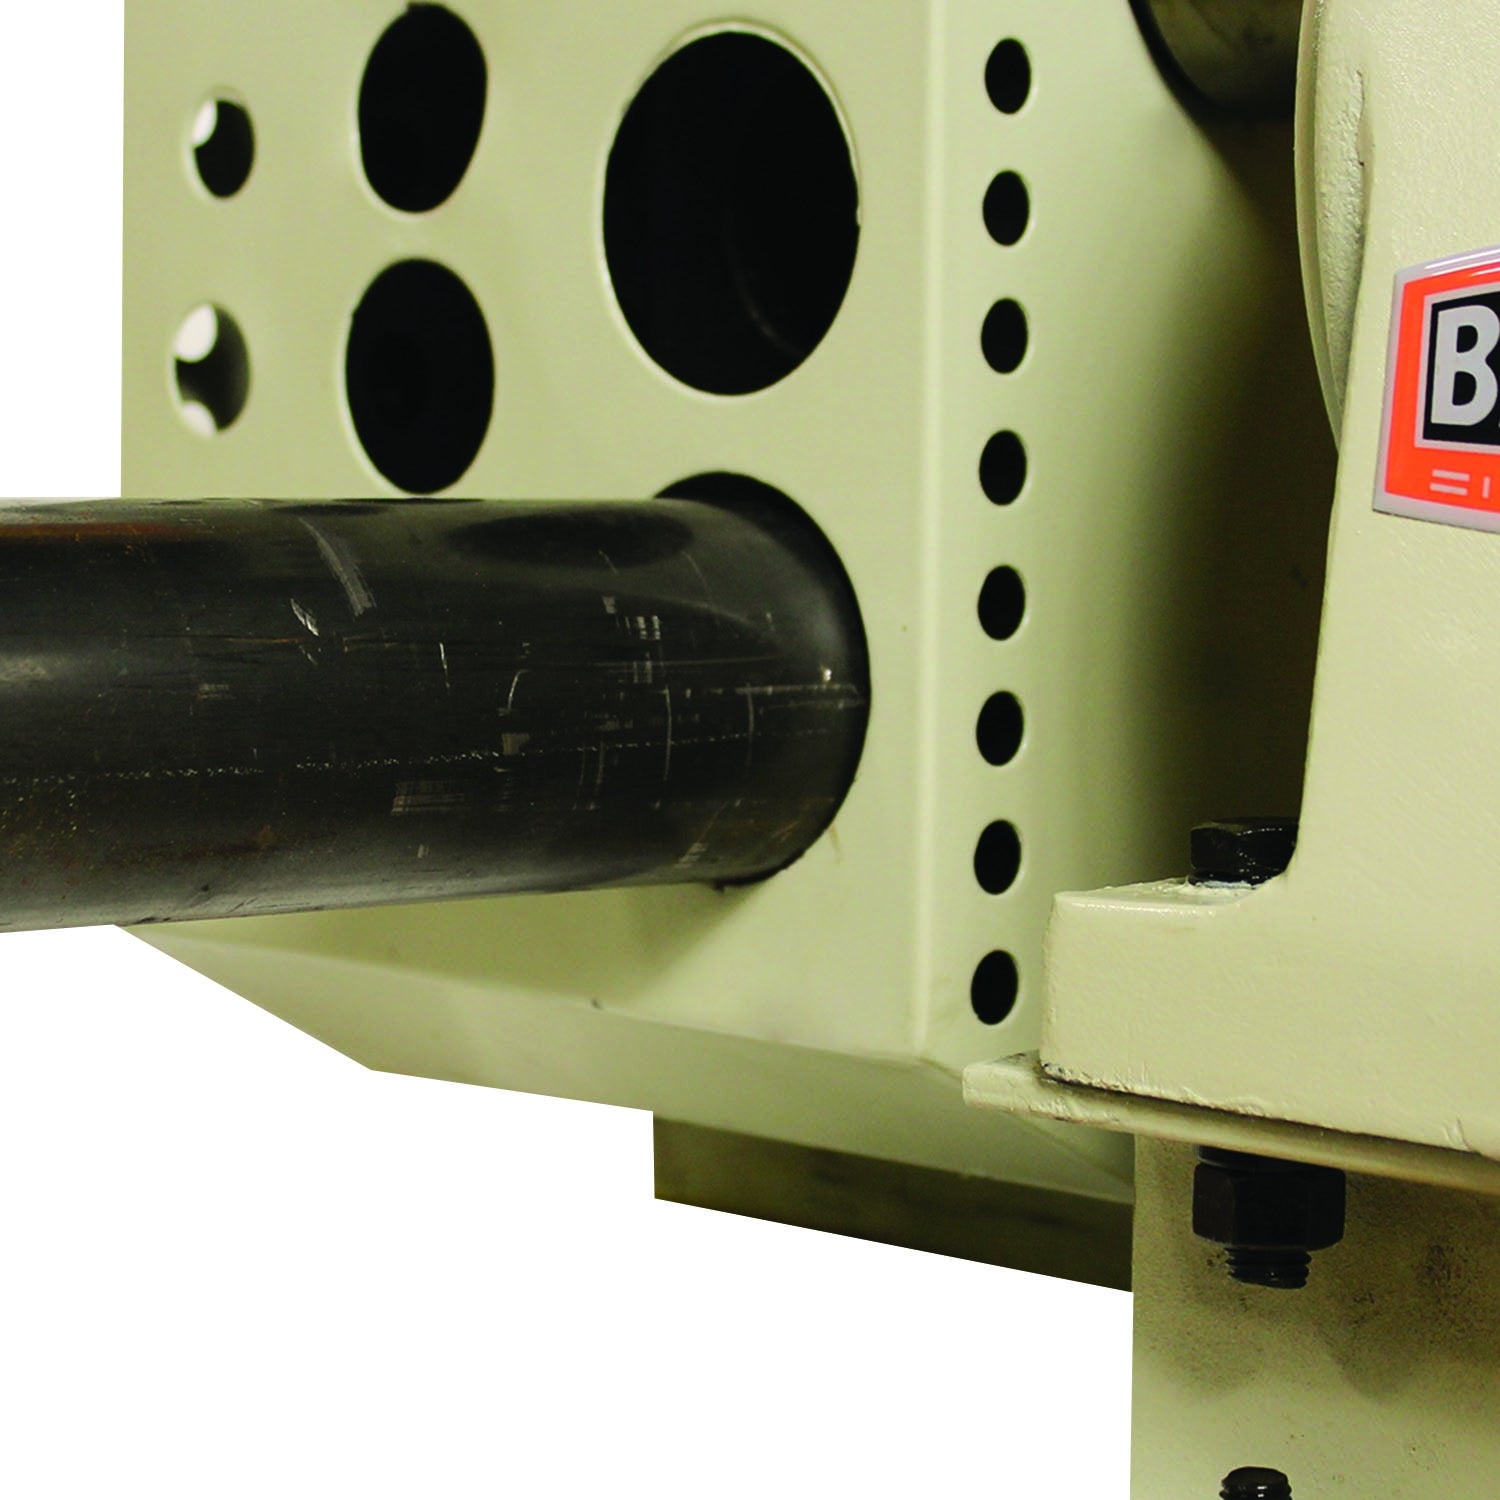 Baileigh TN-200E 220V 1 Phase Electric Pipe and Tube Notcher For 3/4", 1", 1-1/4", 1-1/2", and 2" Sched 40 Pipe